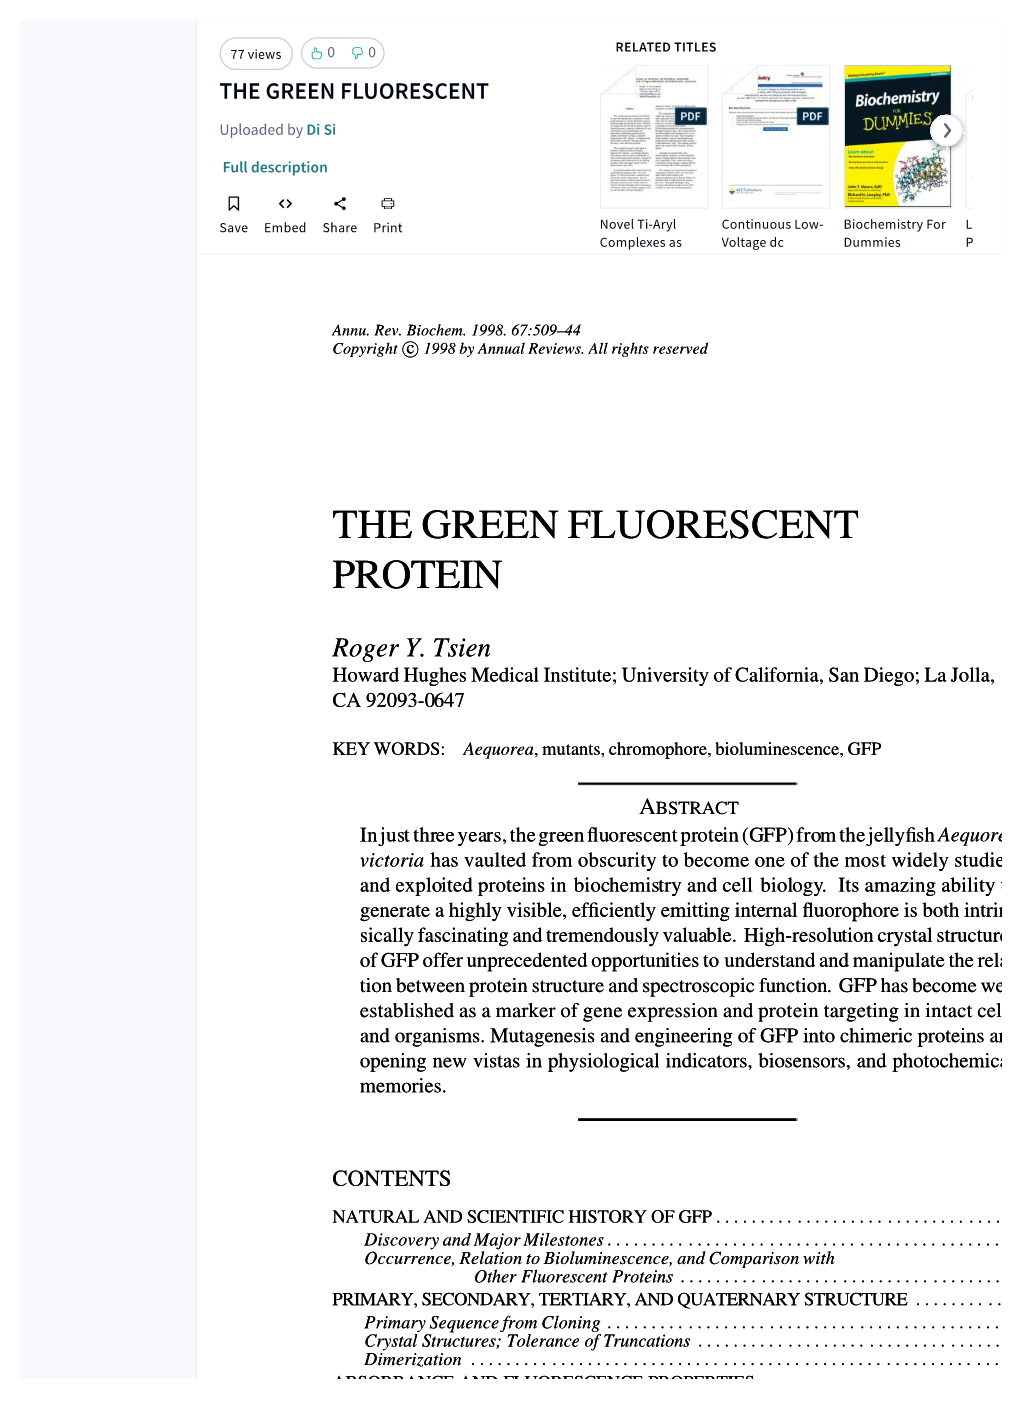 The Green Fluorescent Protein